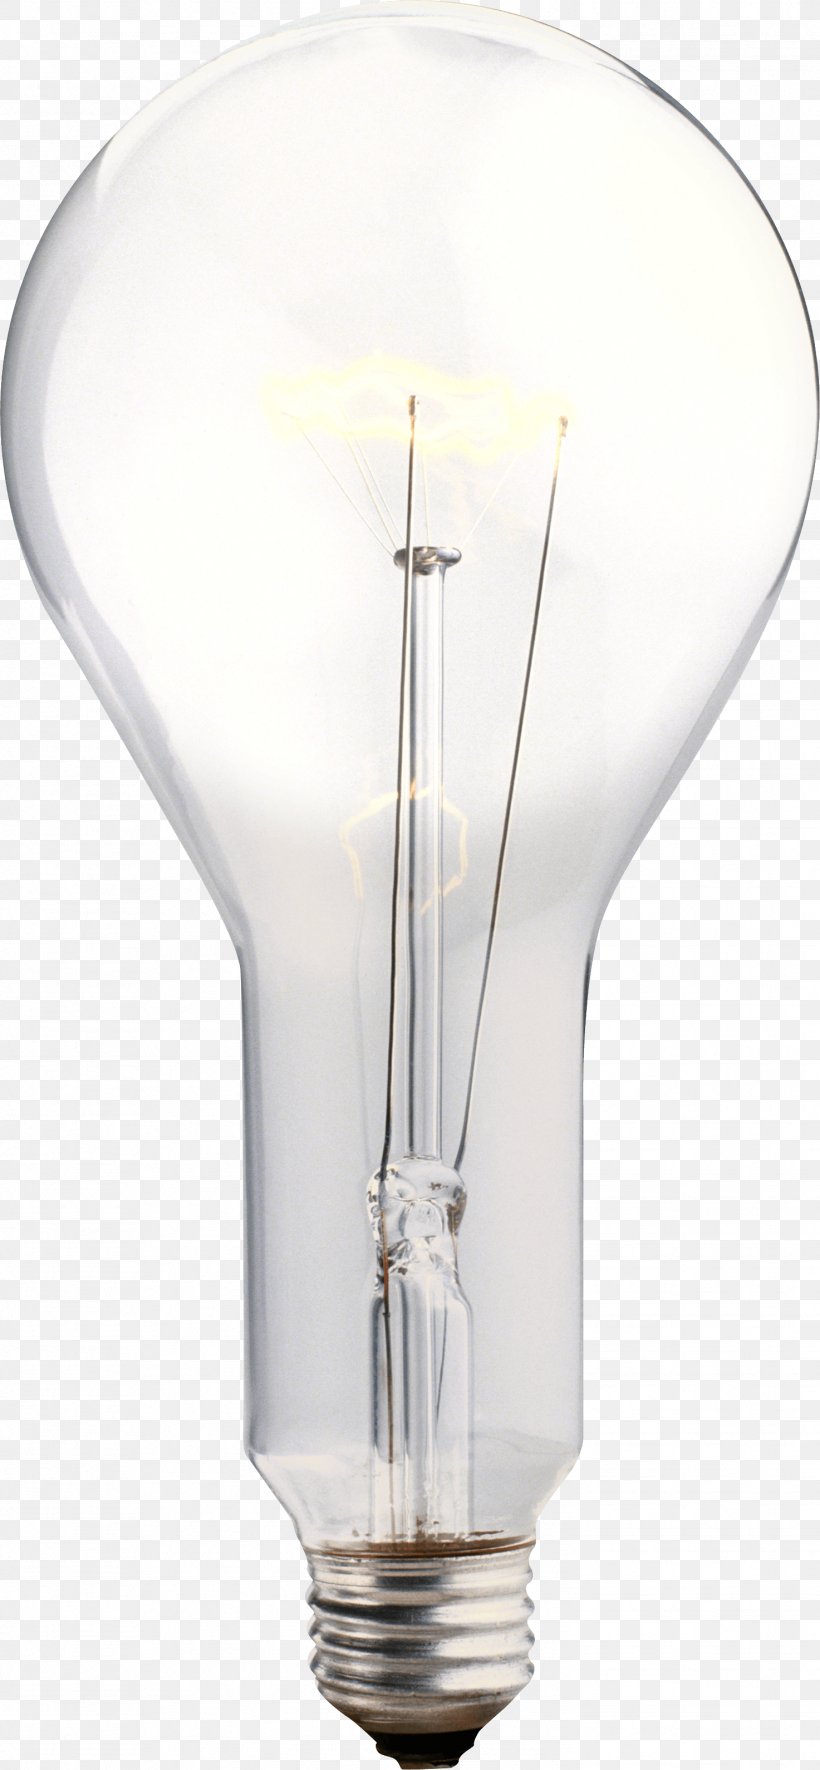 Incandescent Light Bulb Lamp Electricity, PNG, 1473x3180px, Light, Candlepower, Electrical Filament, Electricity, Fluorescent Lamp Download Free